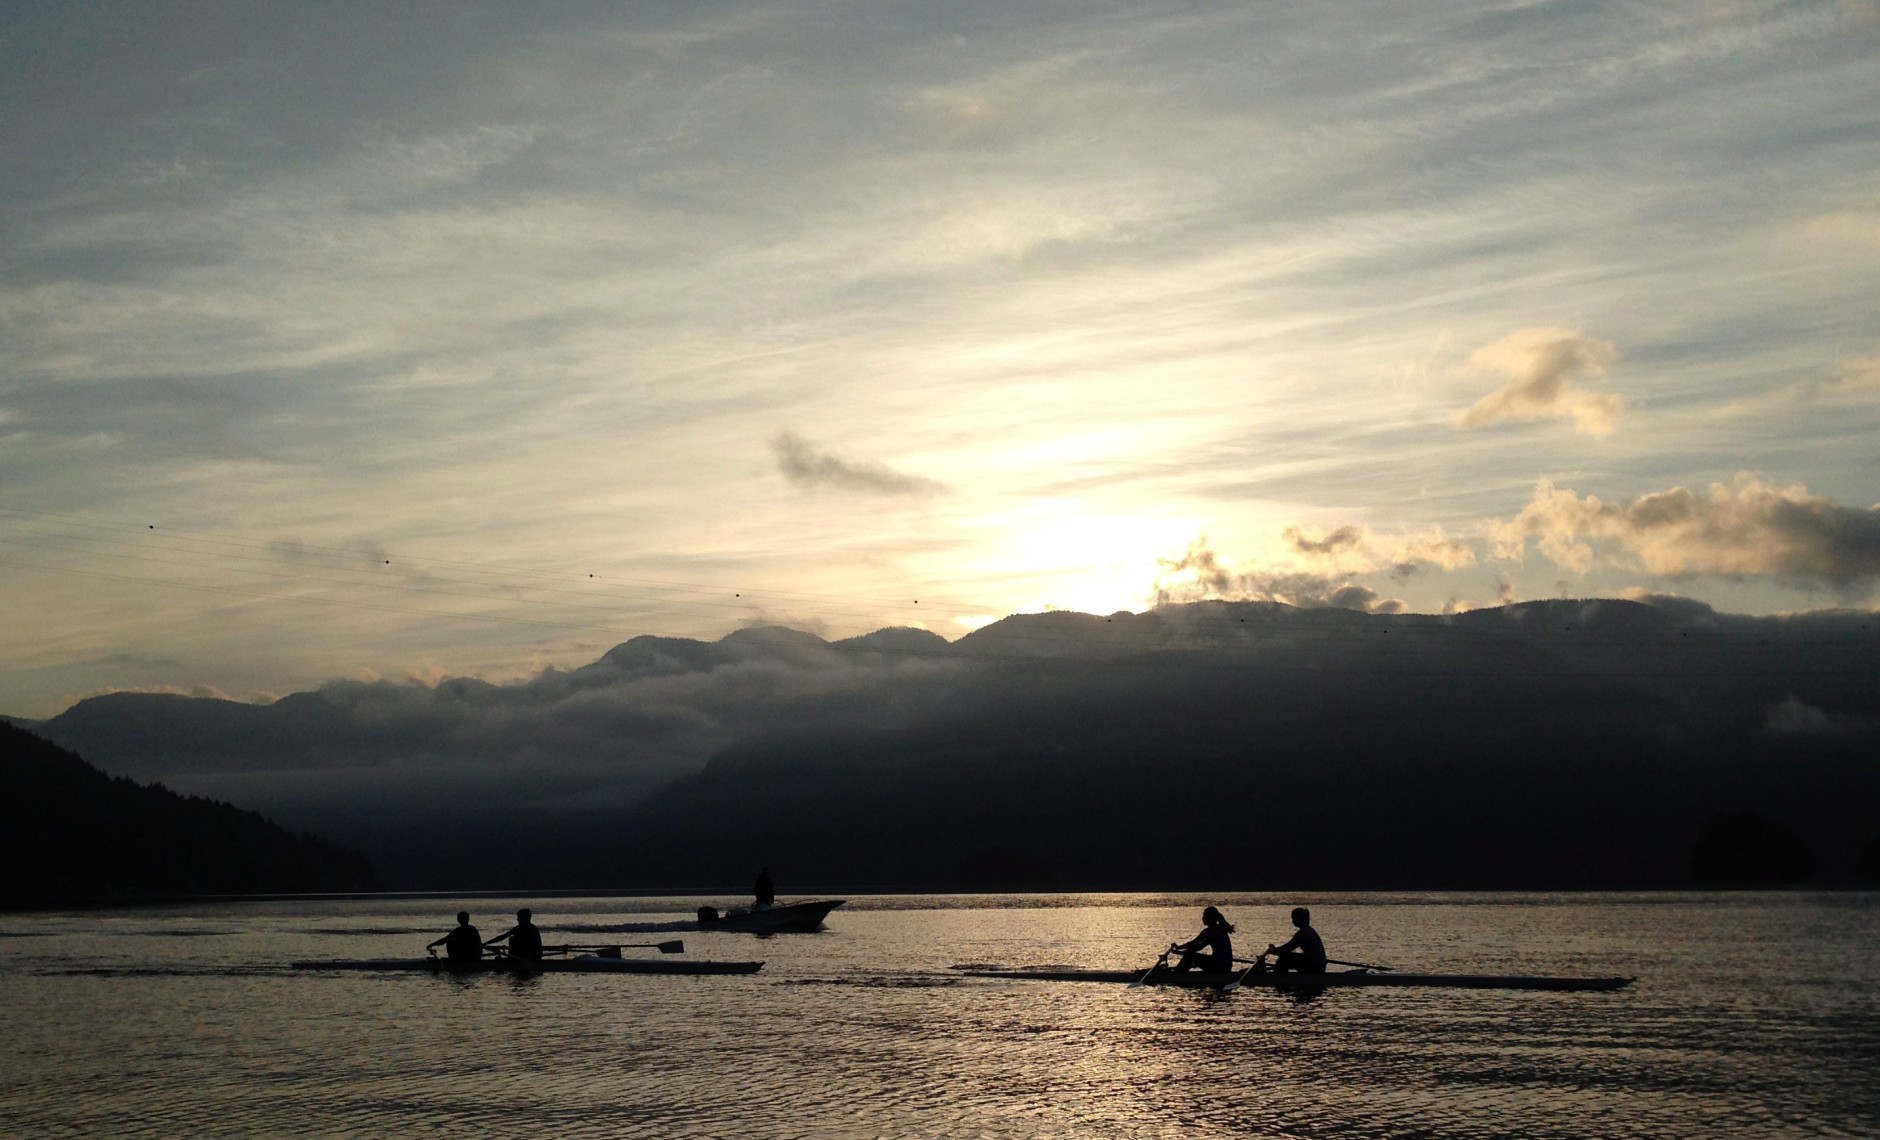 Rowers are silhouetted against the mountains as the sun rises in Deep Cove in North Vancouver, British Columbia, Tuesday, June 3, 2014. (AP Photo/The Canadian Press, Jonathan Hayward)